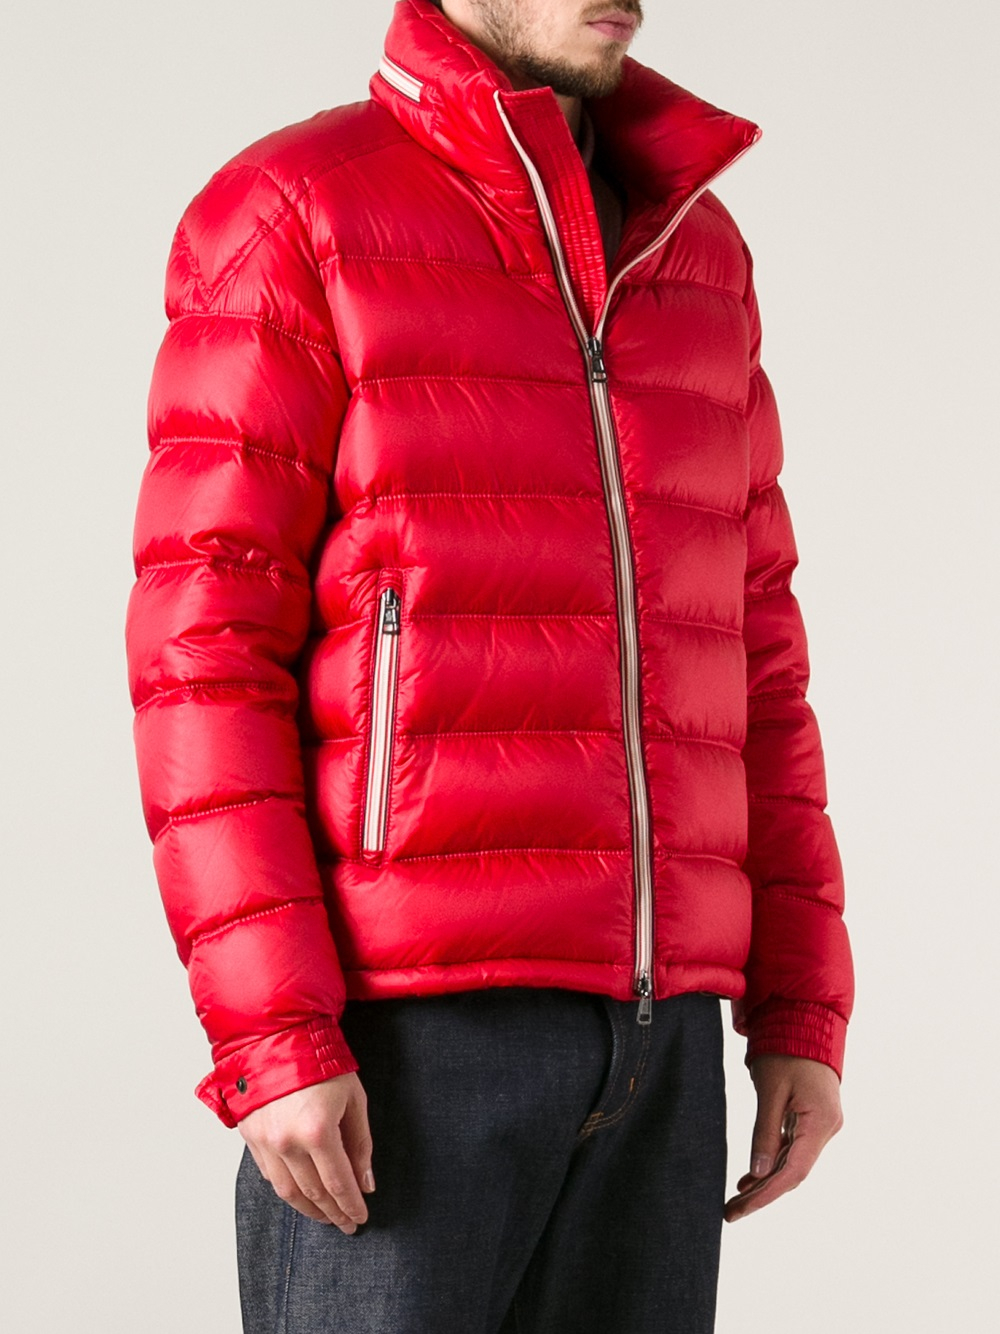 Moncler Chimay Jacket in Red for Men - Lyst